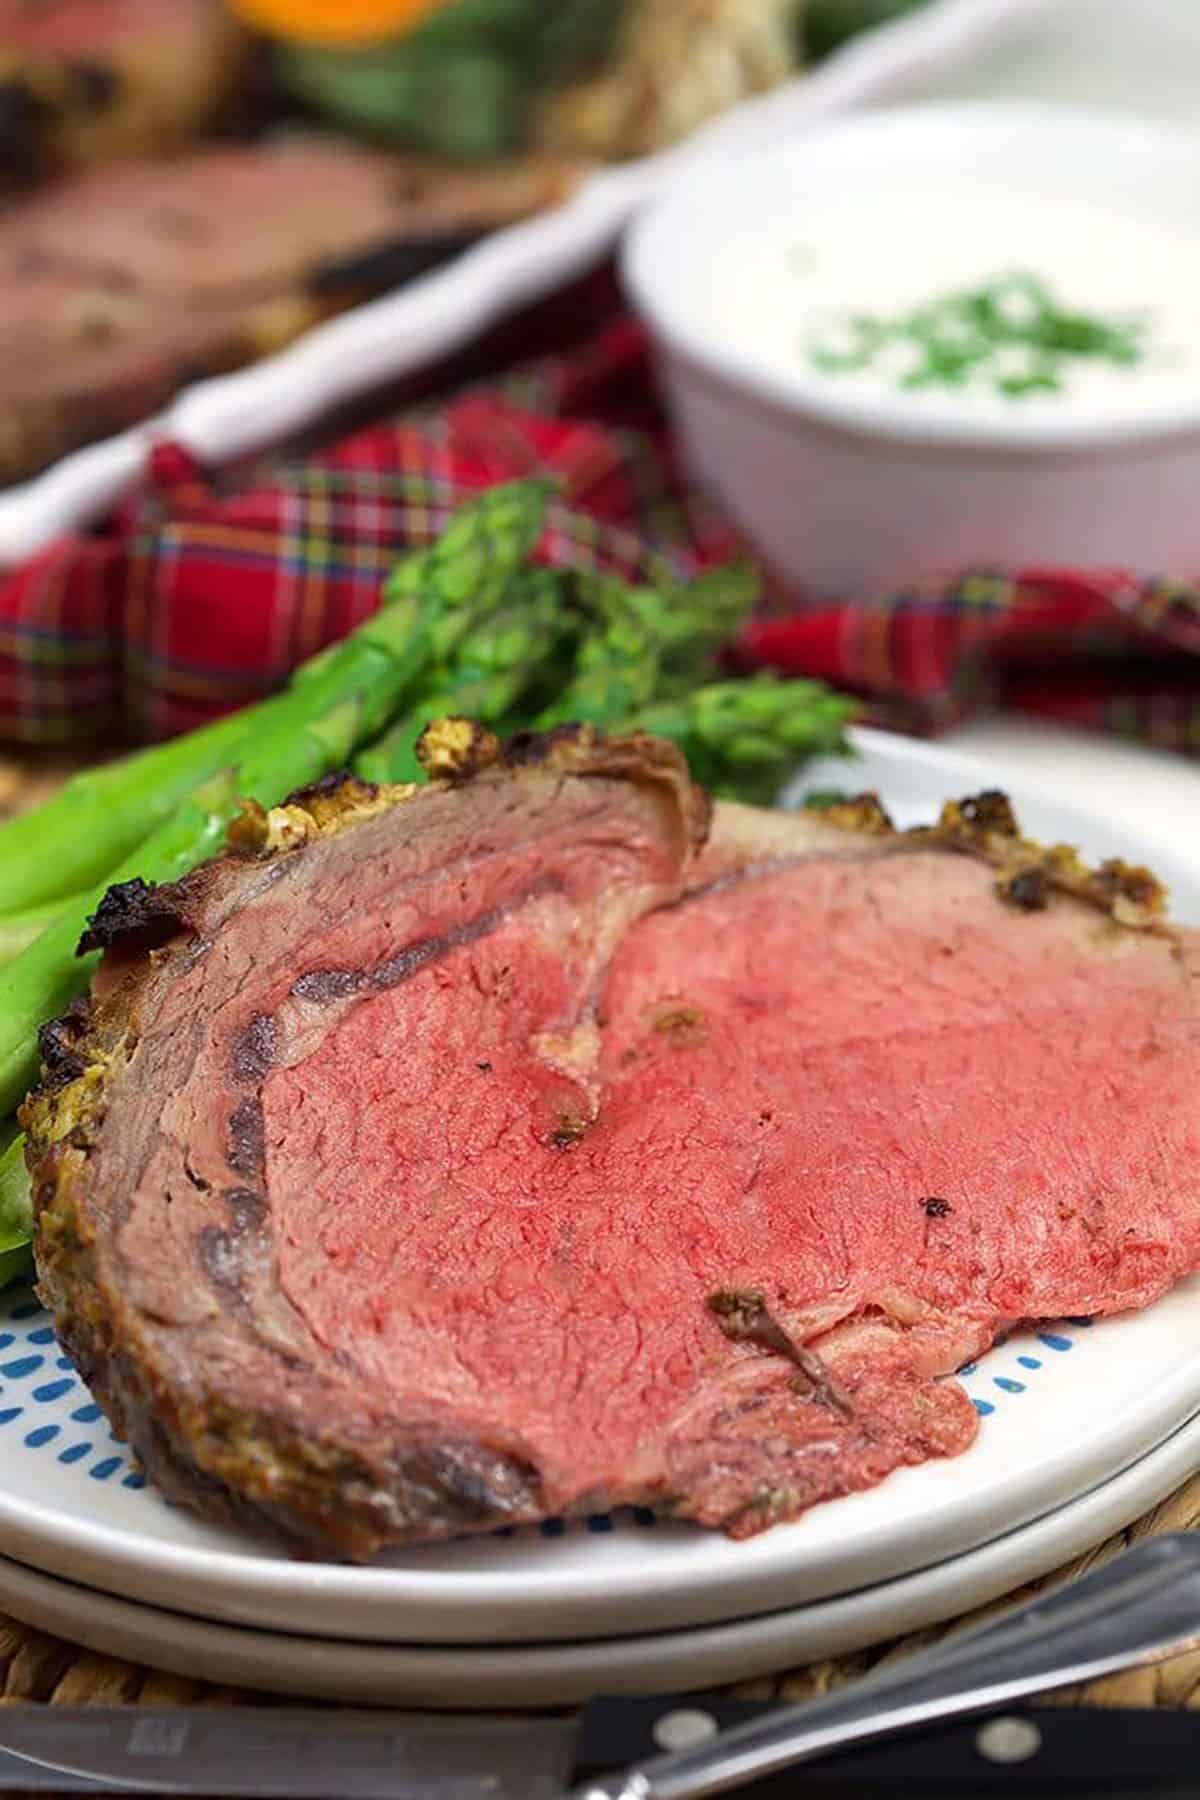 slice of prime rib on a white plate.